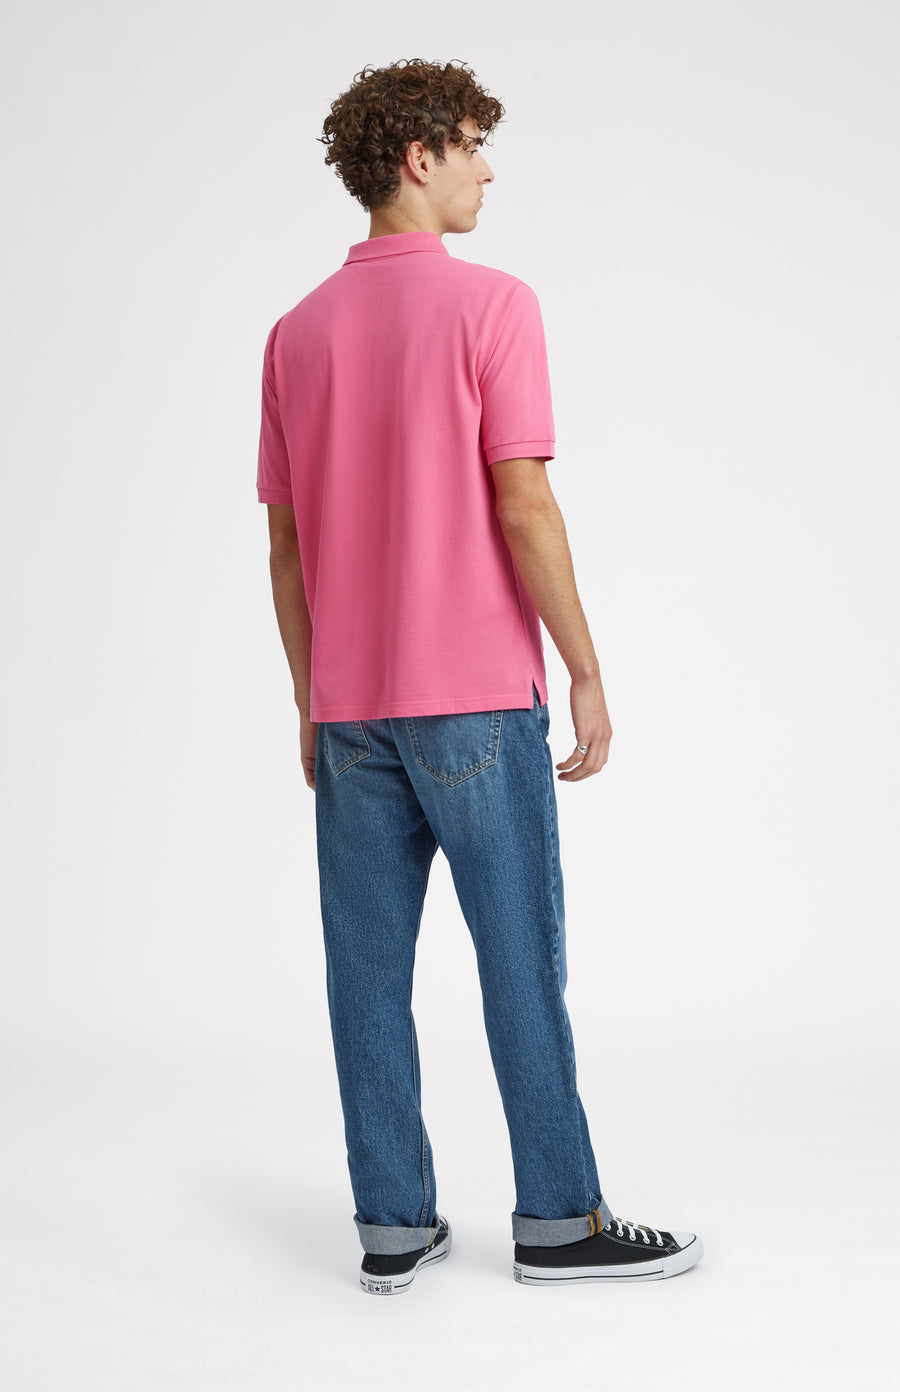 Geometric George Golf Cotton Polo Shirt In Heather Pink rear view - Pringle of Scotland